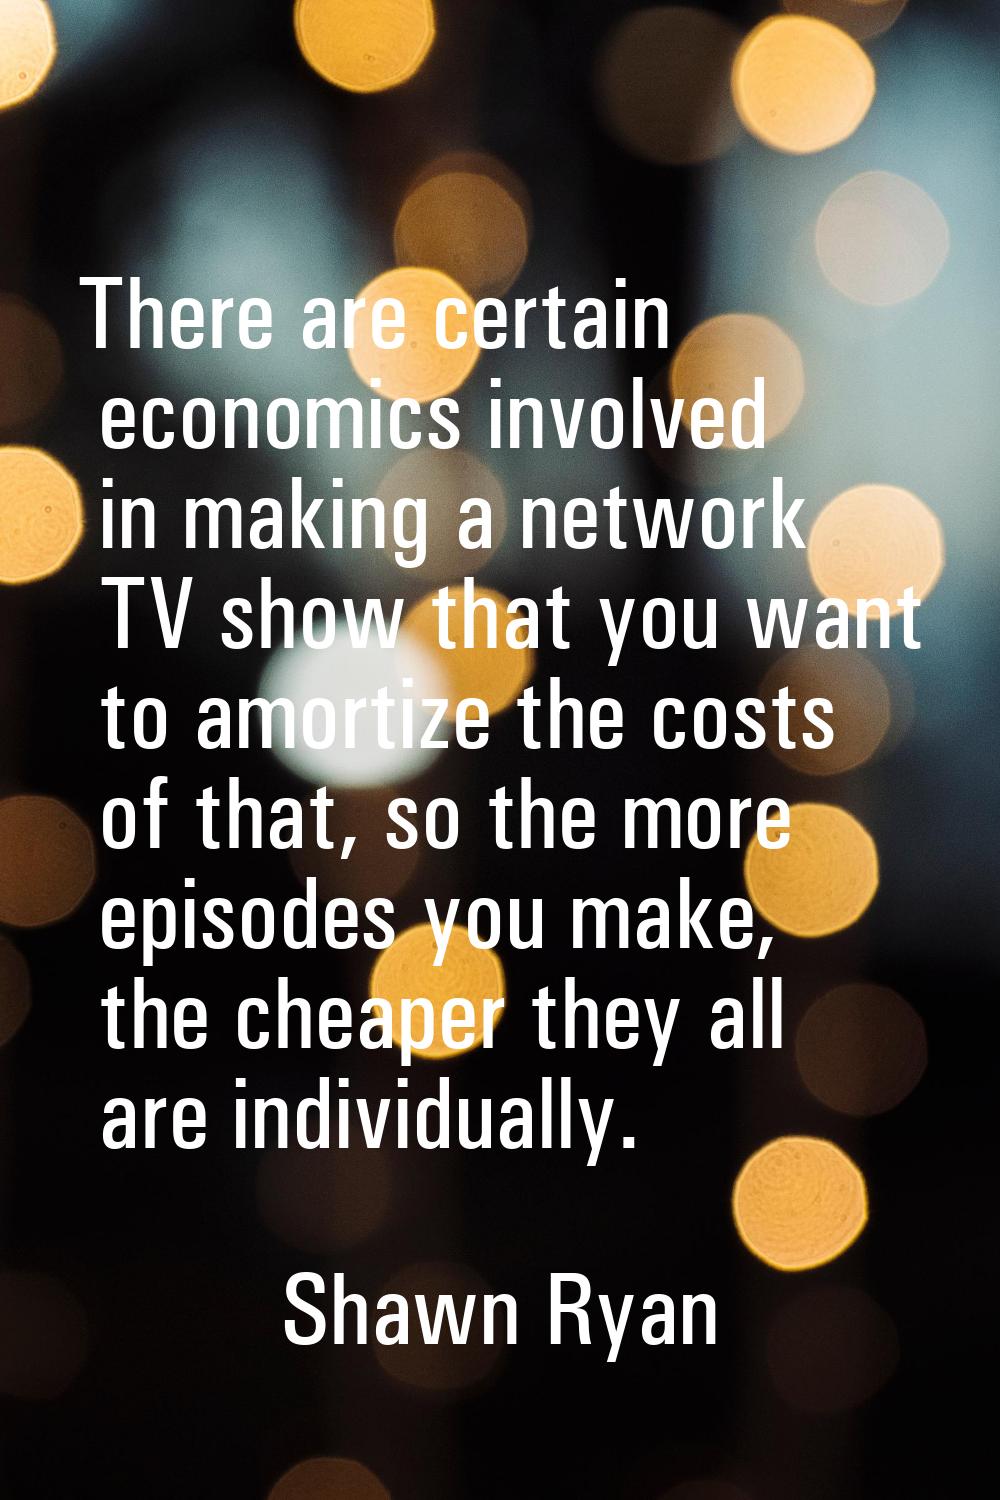 There are certain economics involved in making a network TV show that you want to amortize the cost